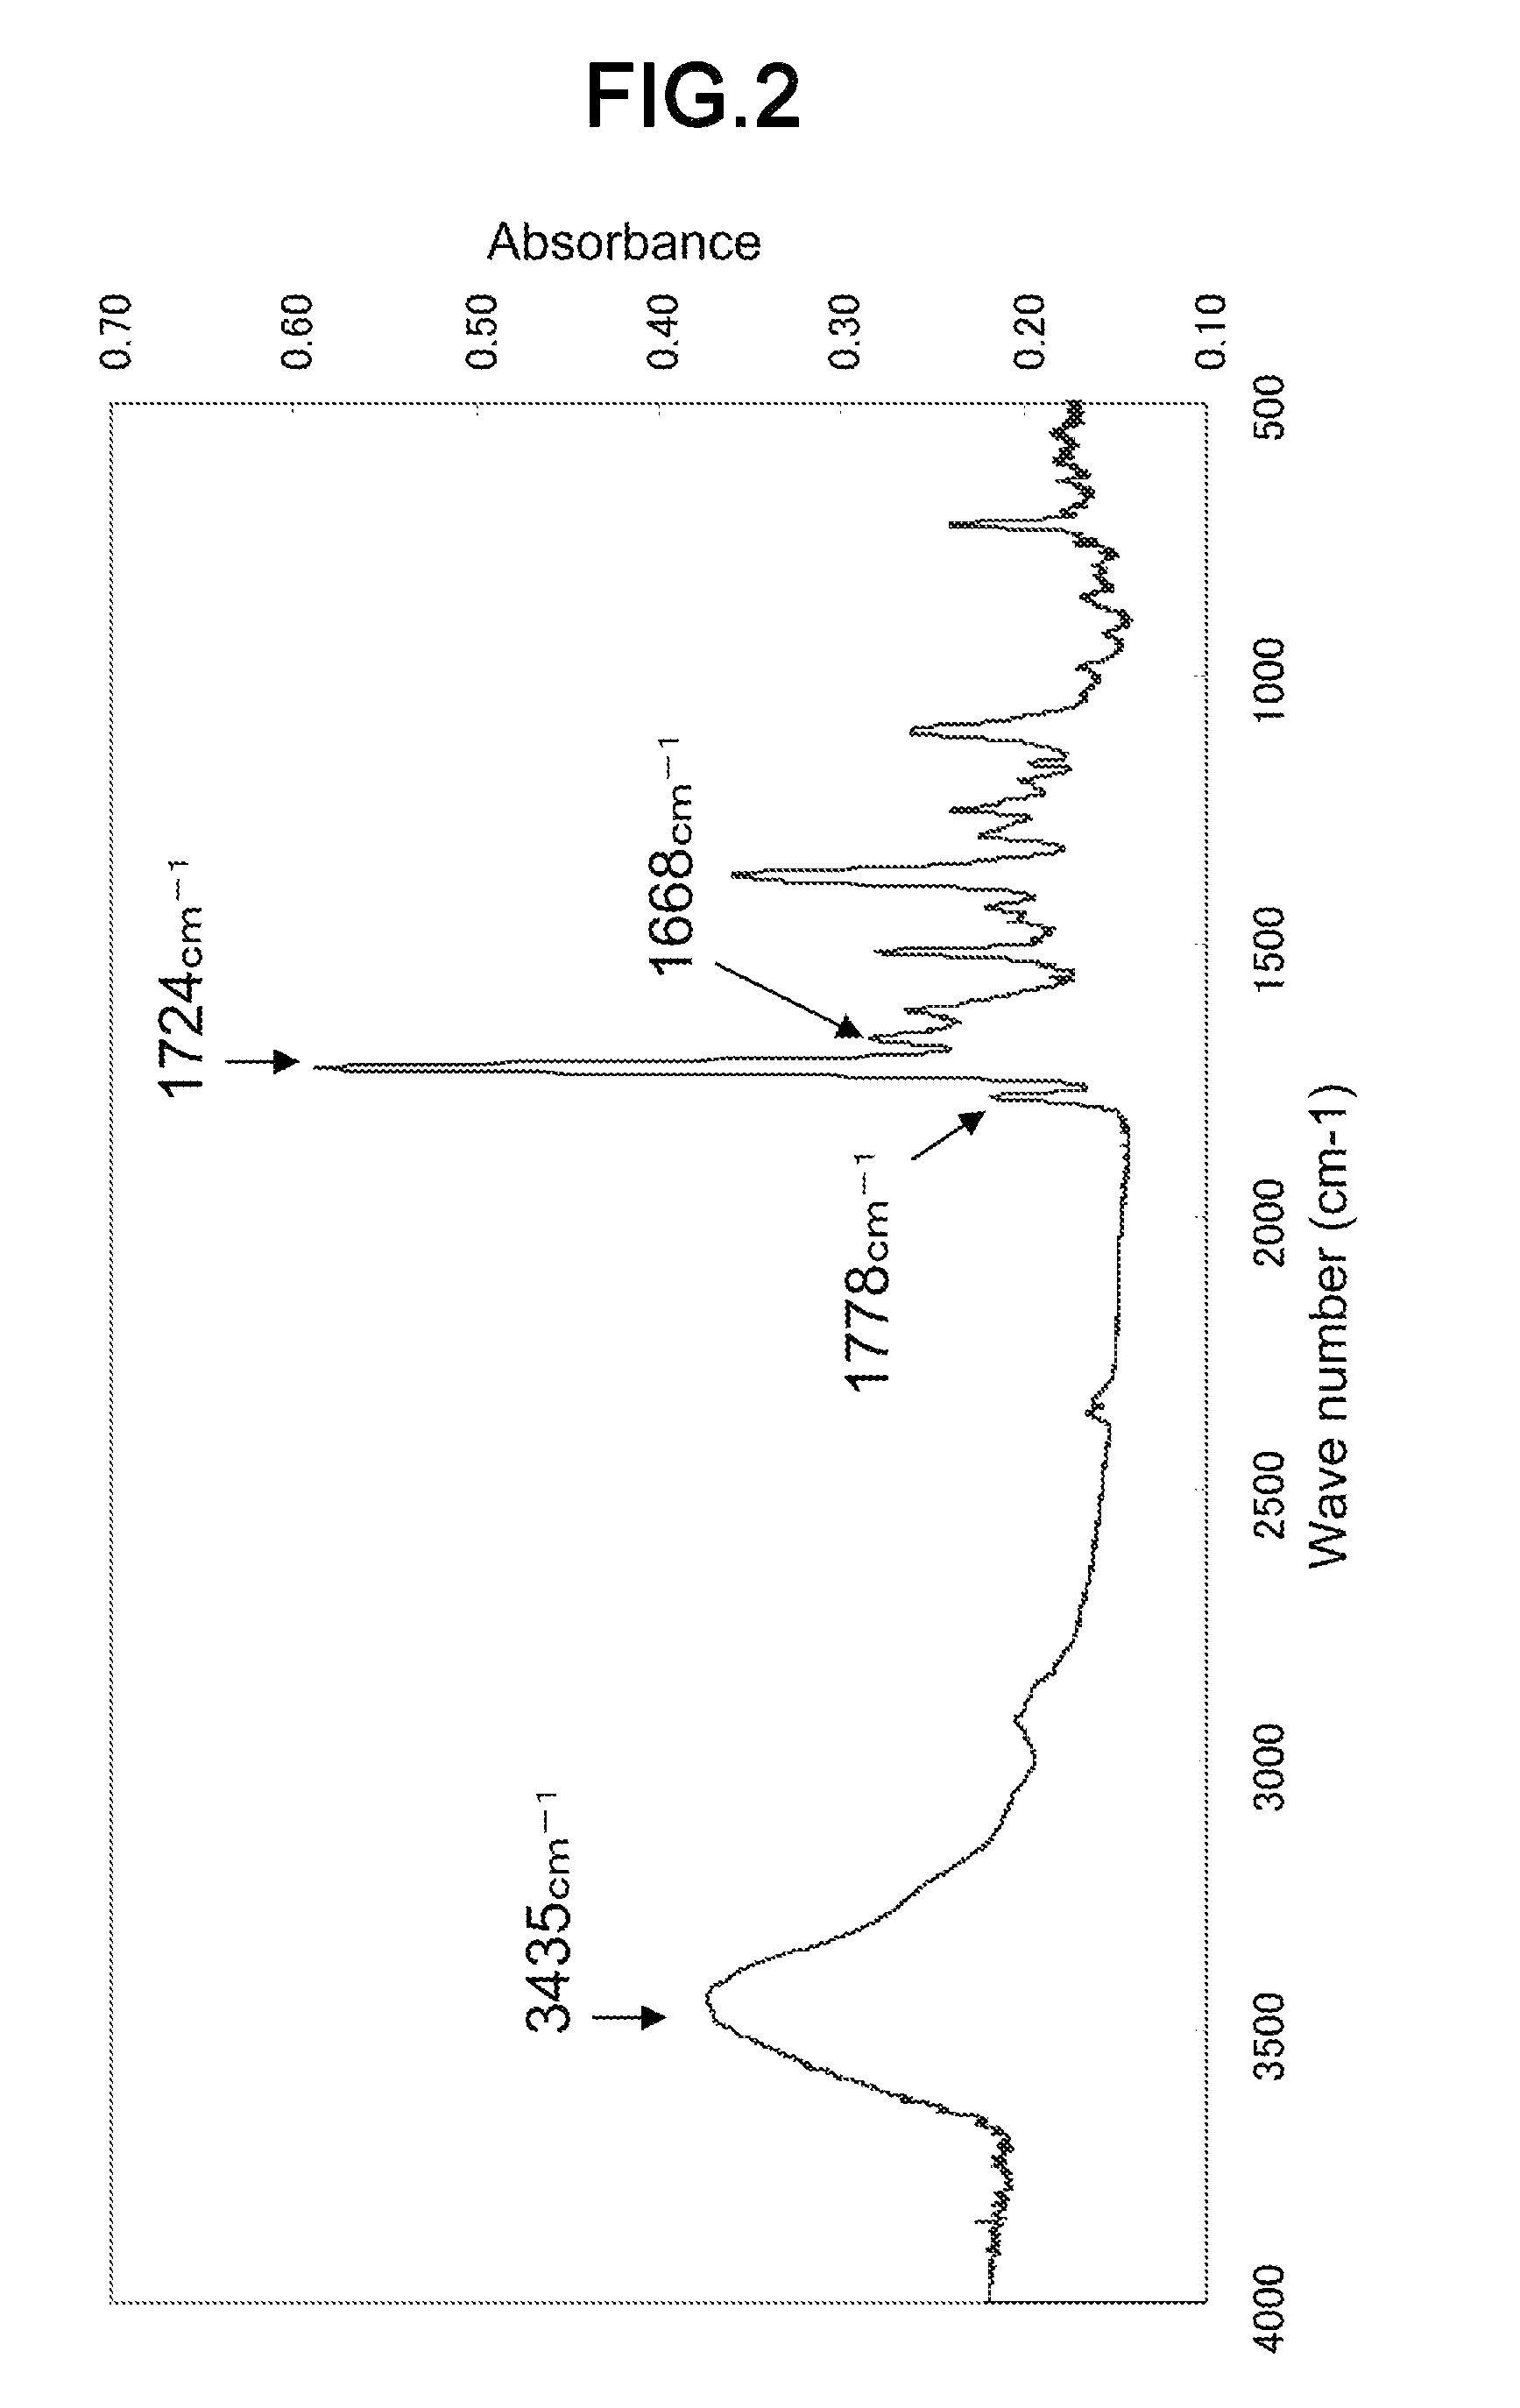 Diamine polymer and resin composition thereof